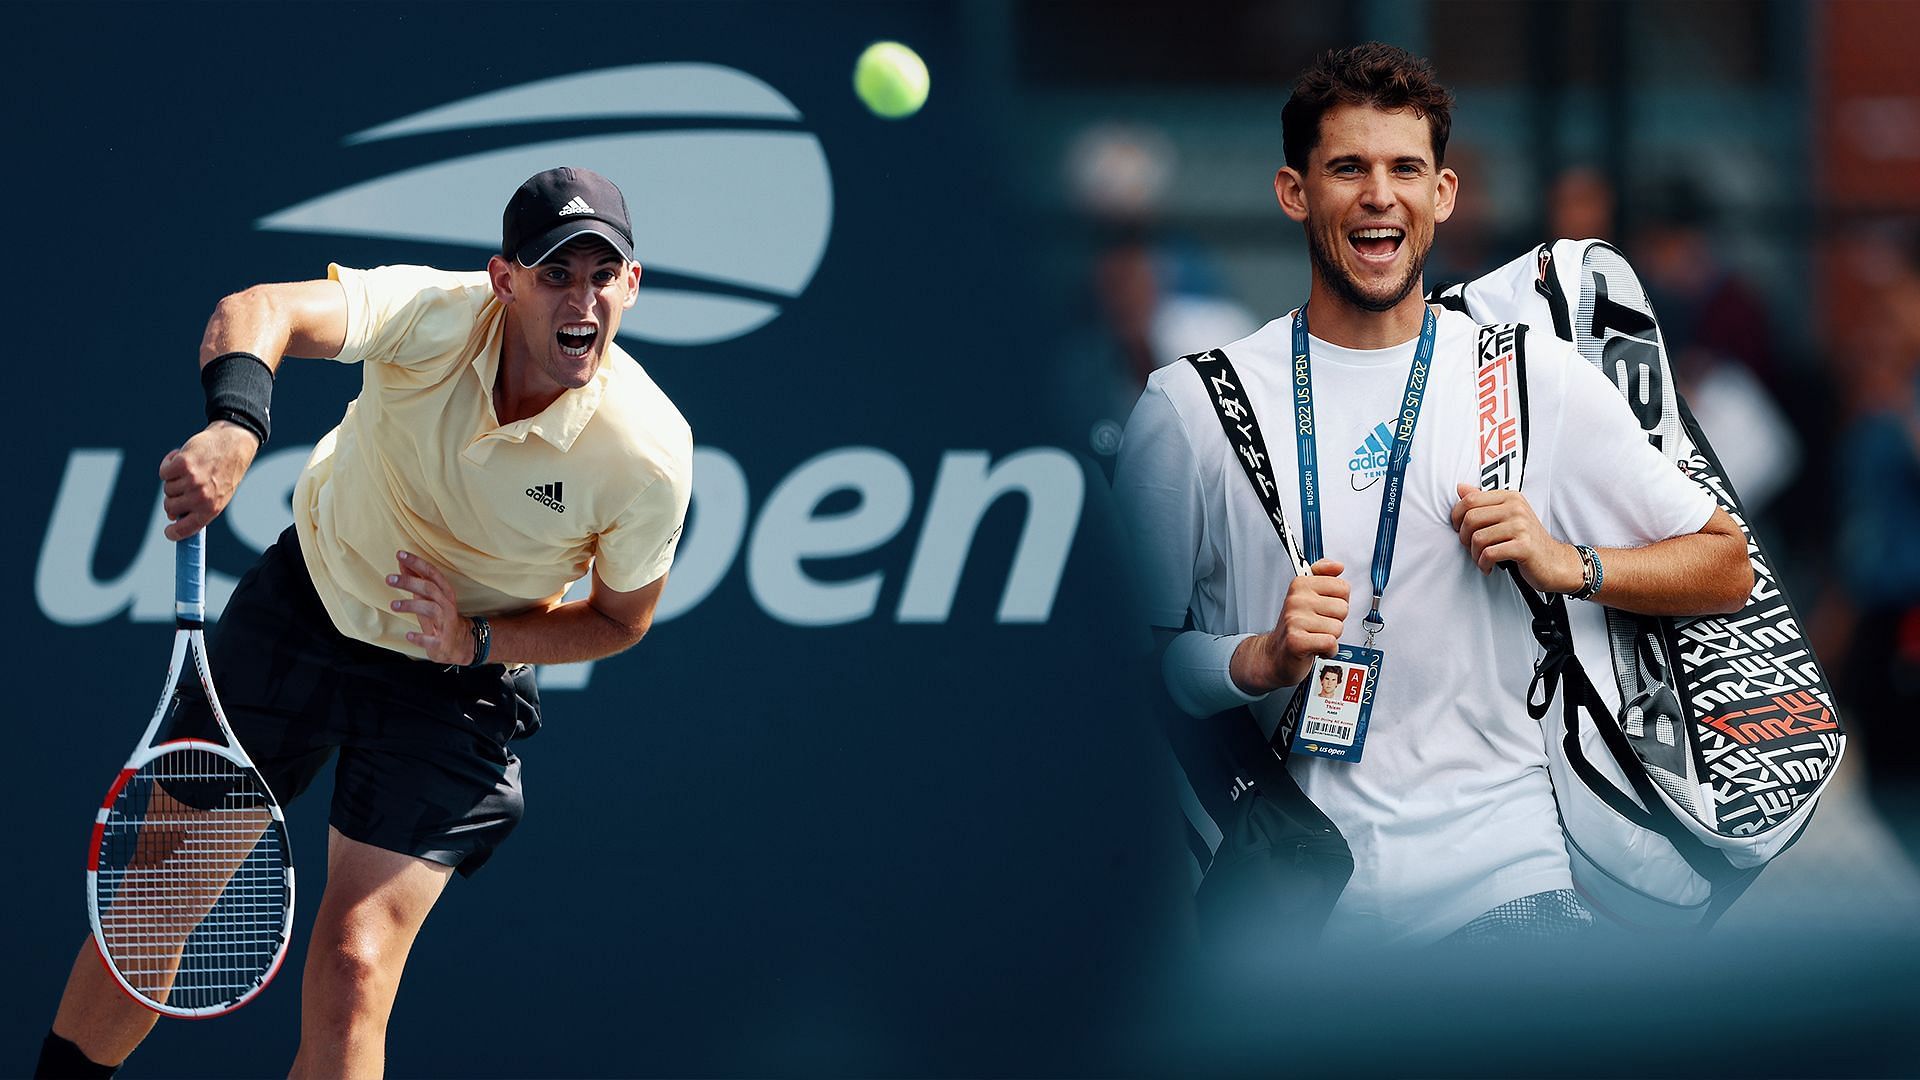 Dominic Thiem reflected on his career post-US Open success